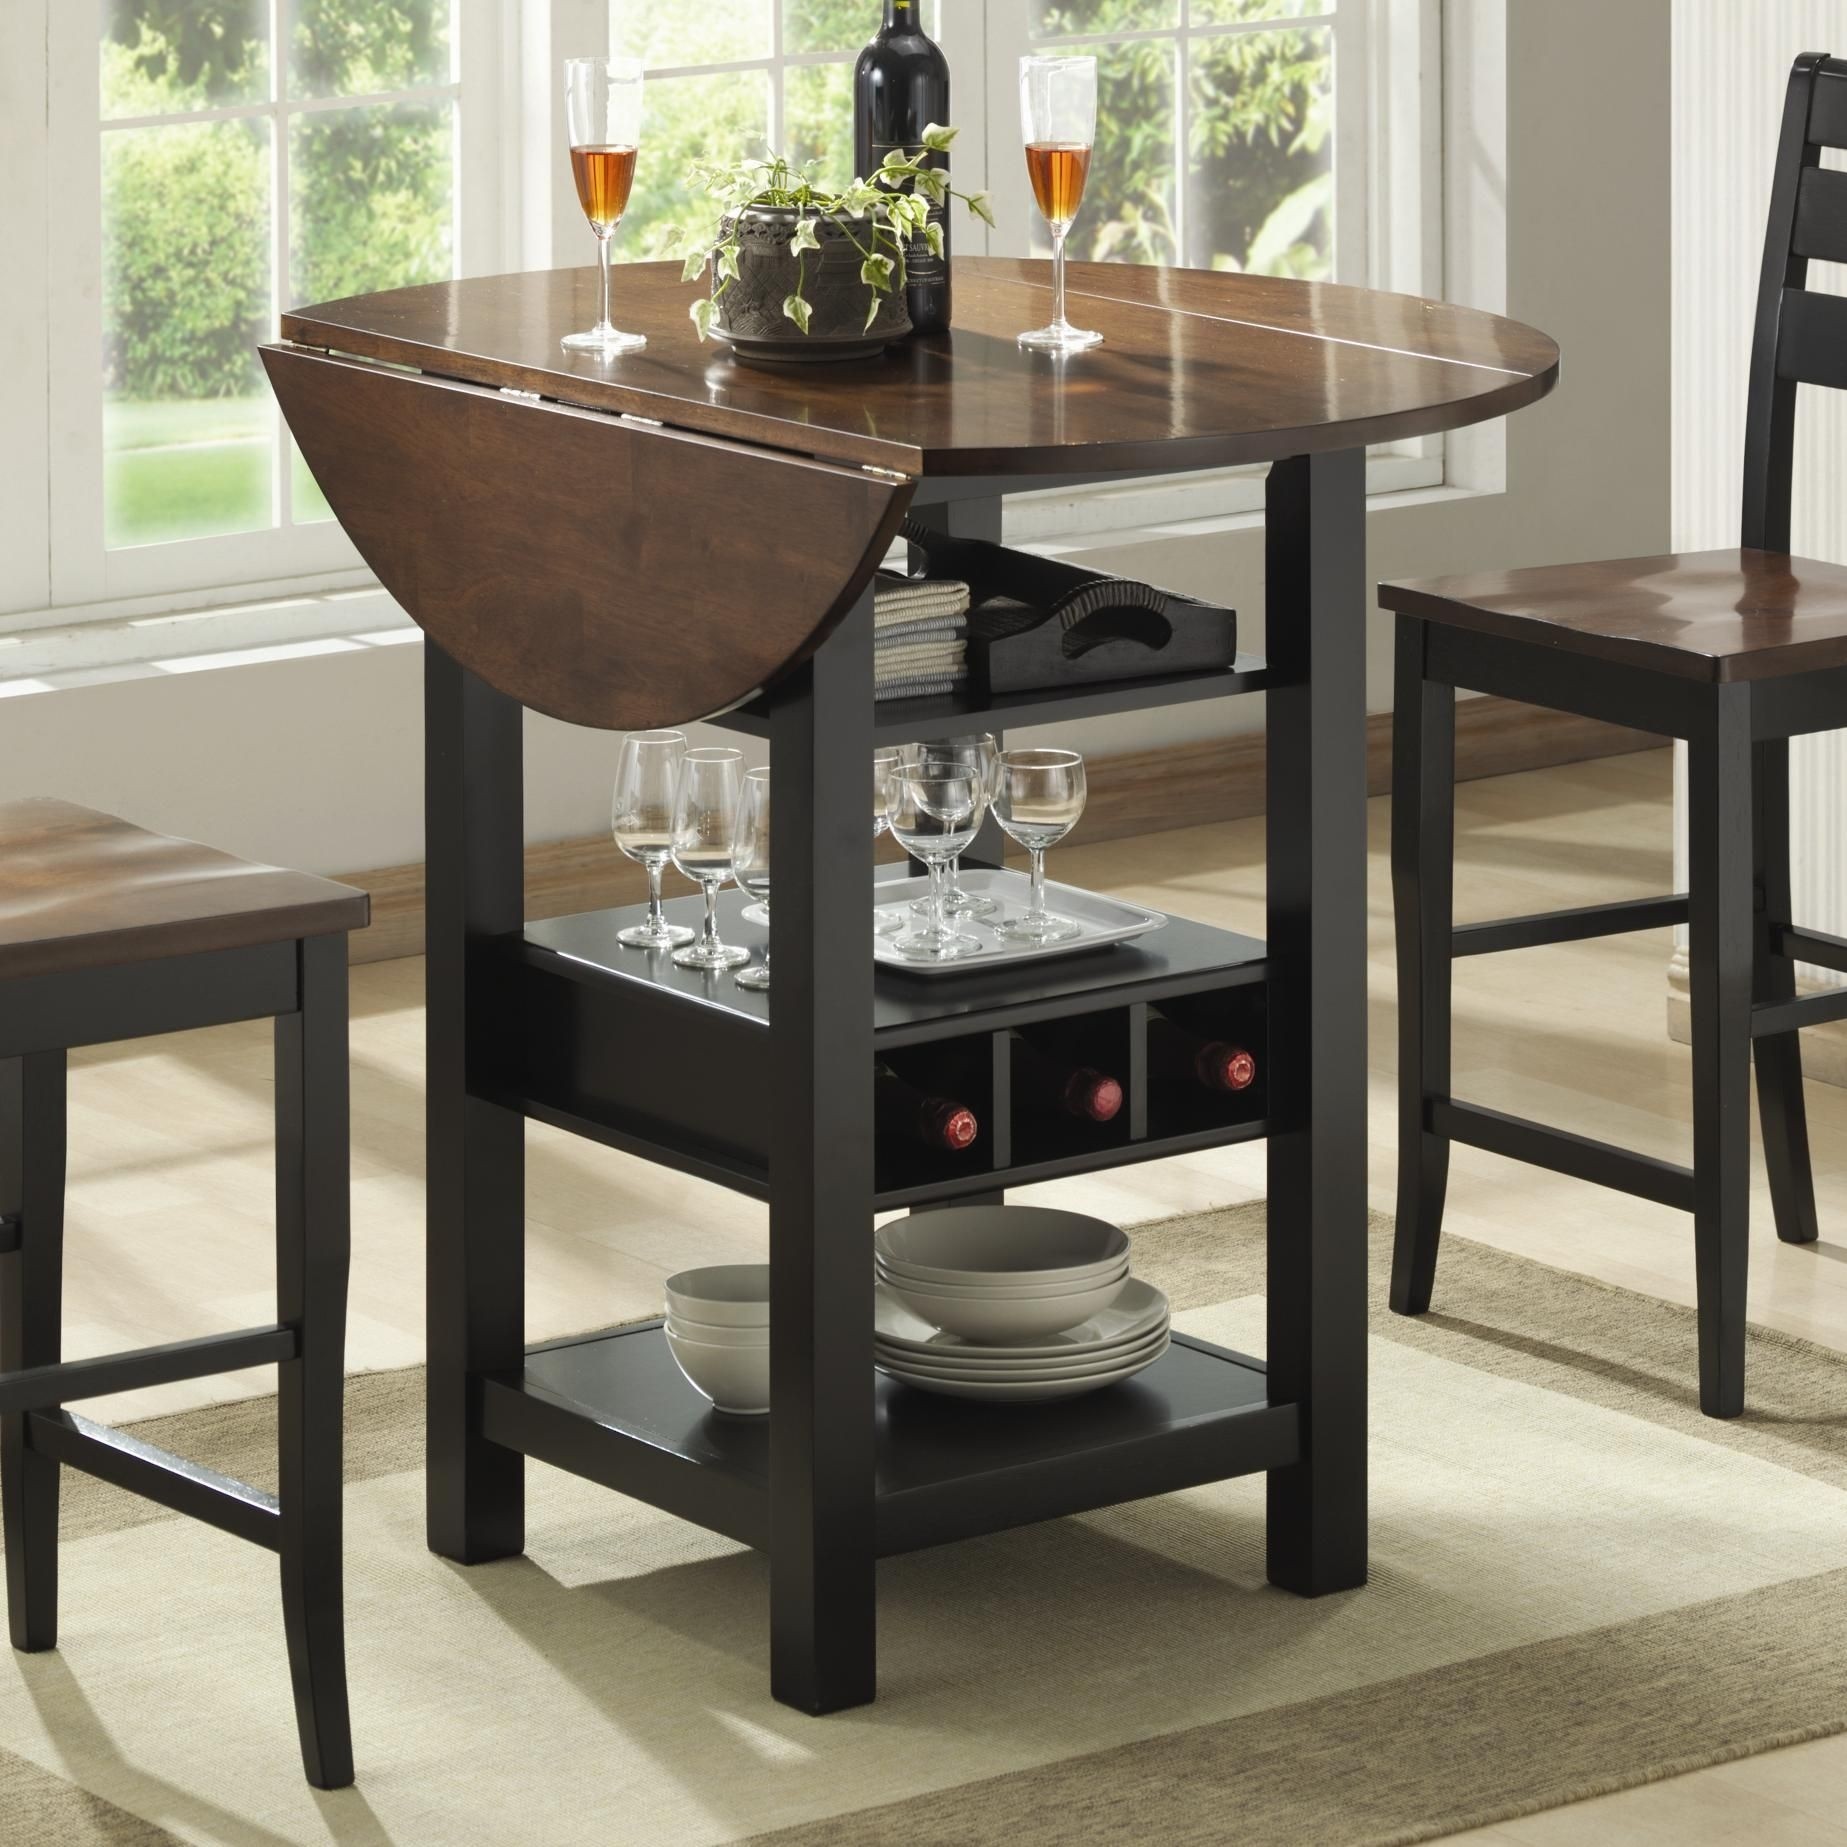 Ridgewood drop leaf counter table with wine rack by